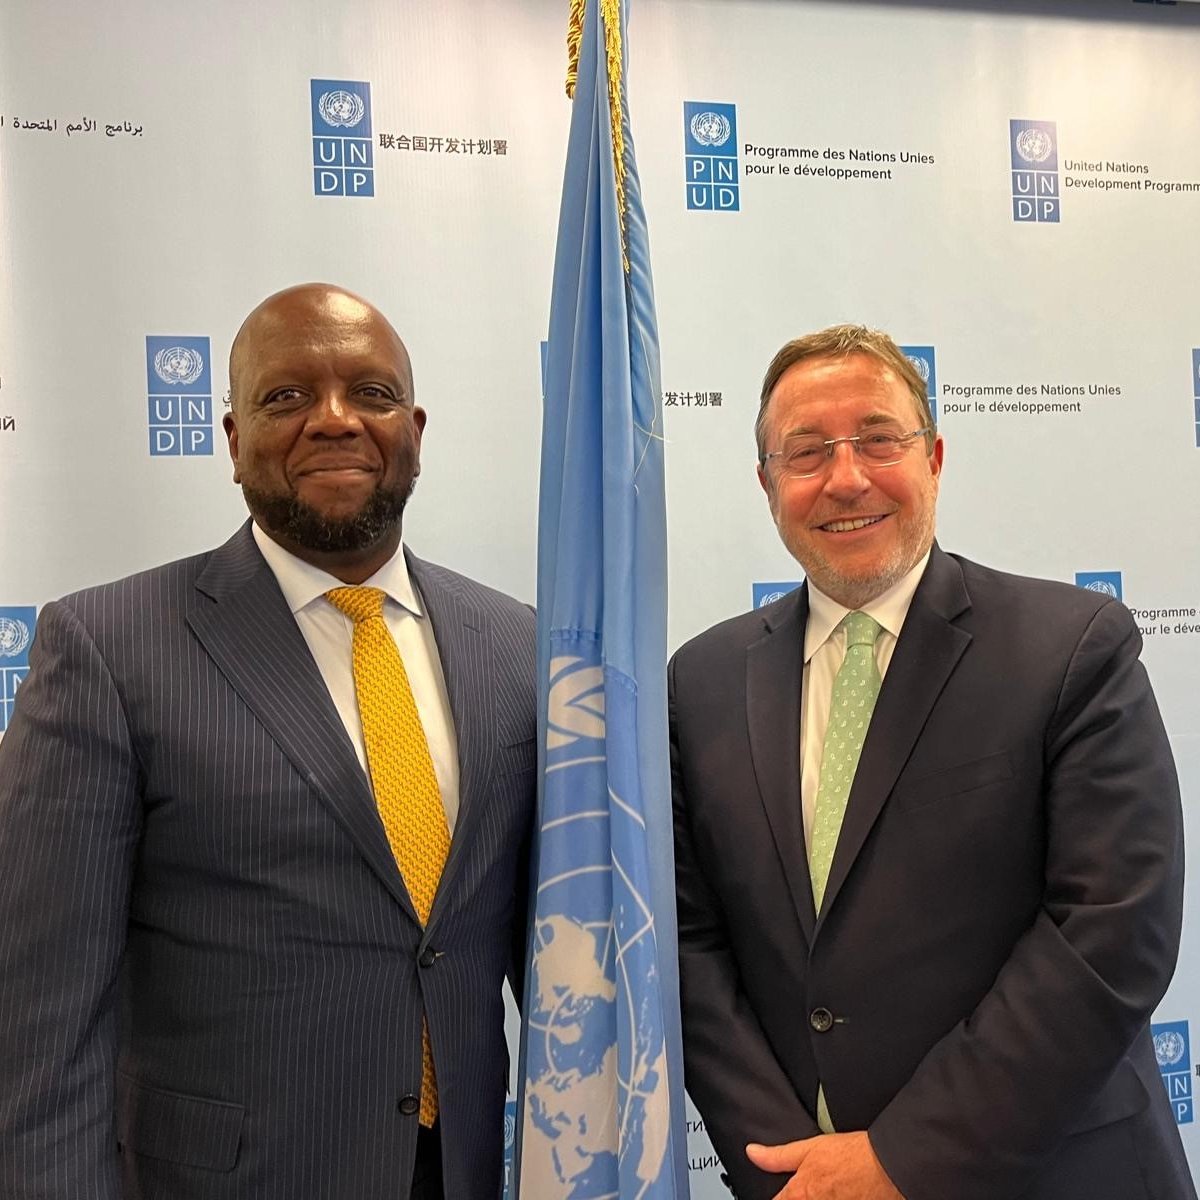 A fond farewell to HE @AmbMKimani of @KenyaMissionUN Your vision & leadership - as President of our Exec Board, as a development professional & a friend- have inspired us to explore new pathways to advance the #SDGs & rethink development in crisis contexts Asante sana & kwaheri